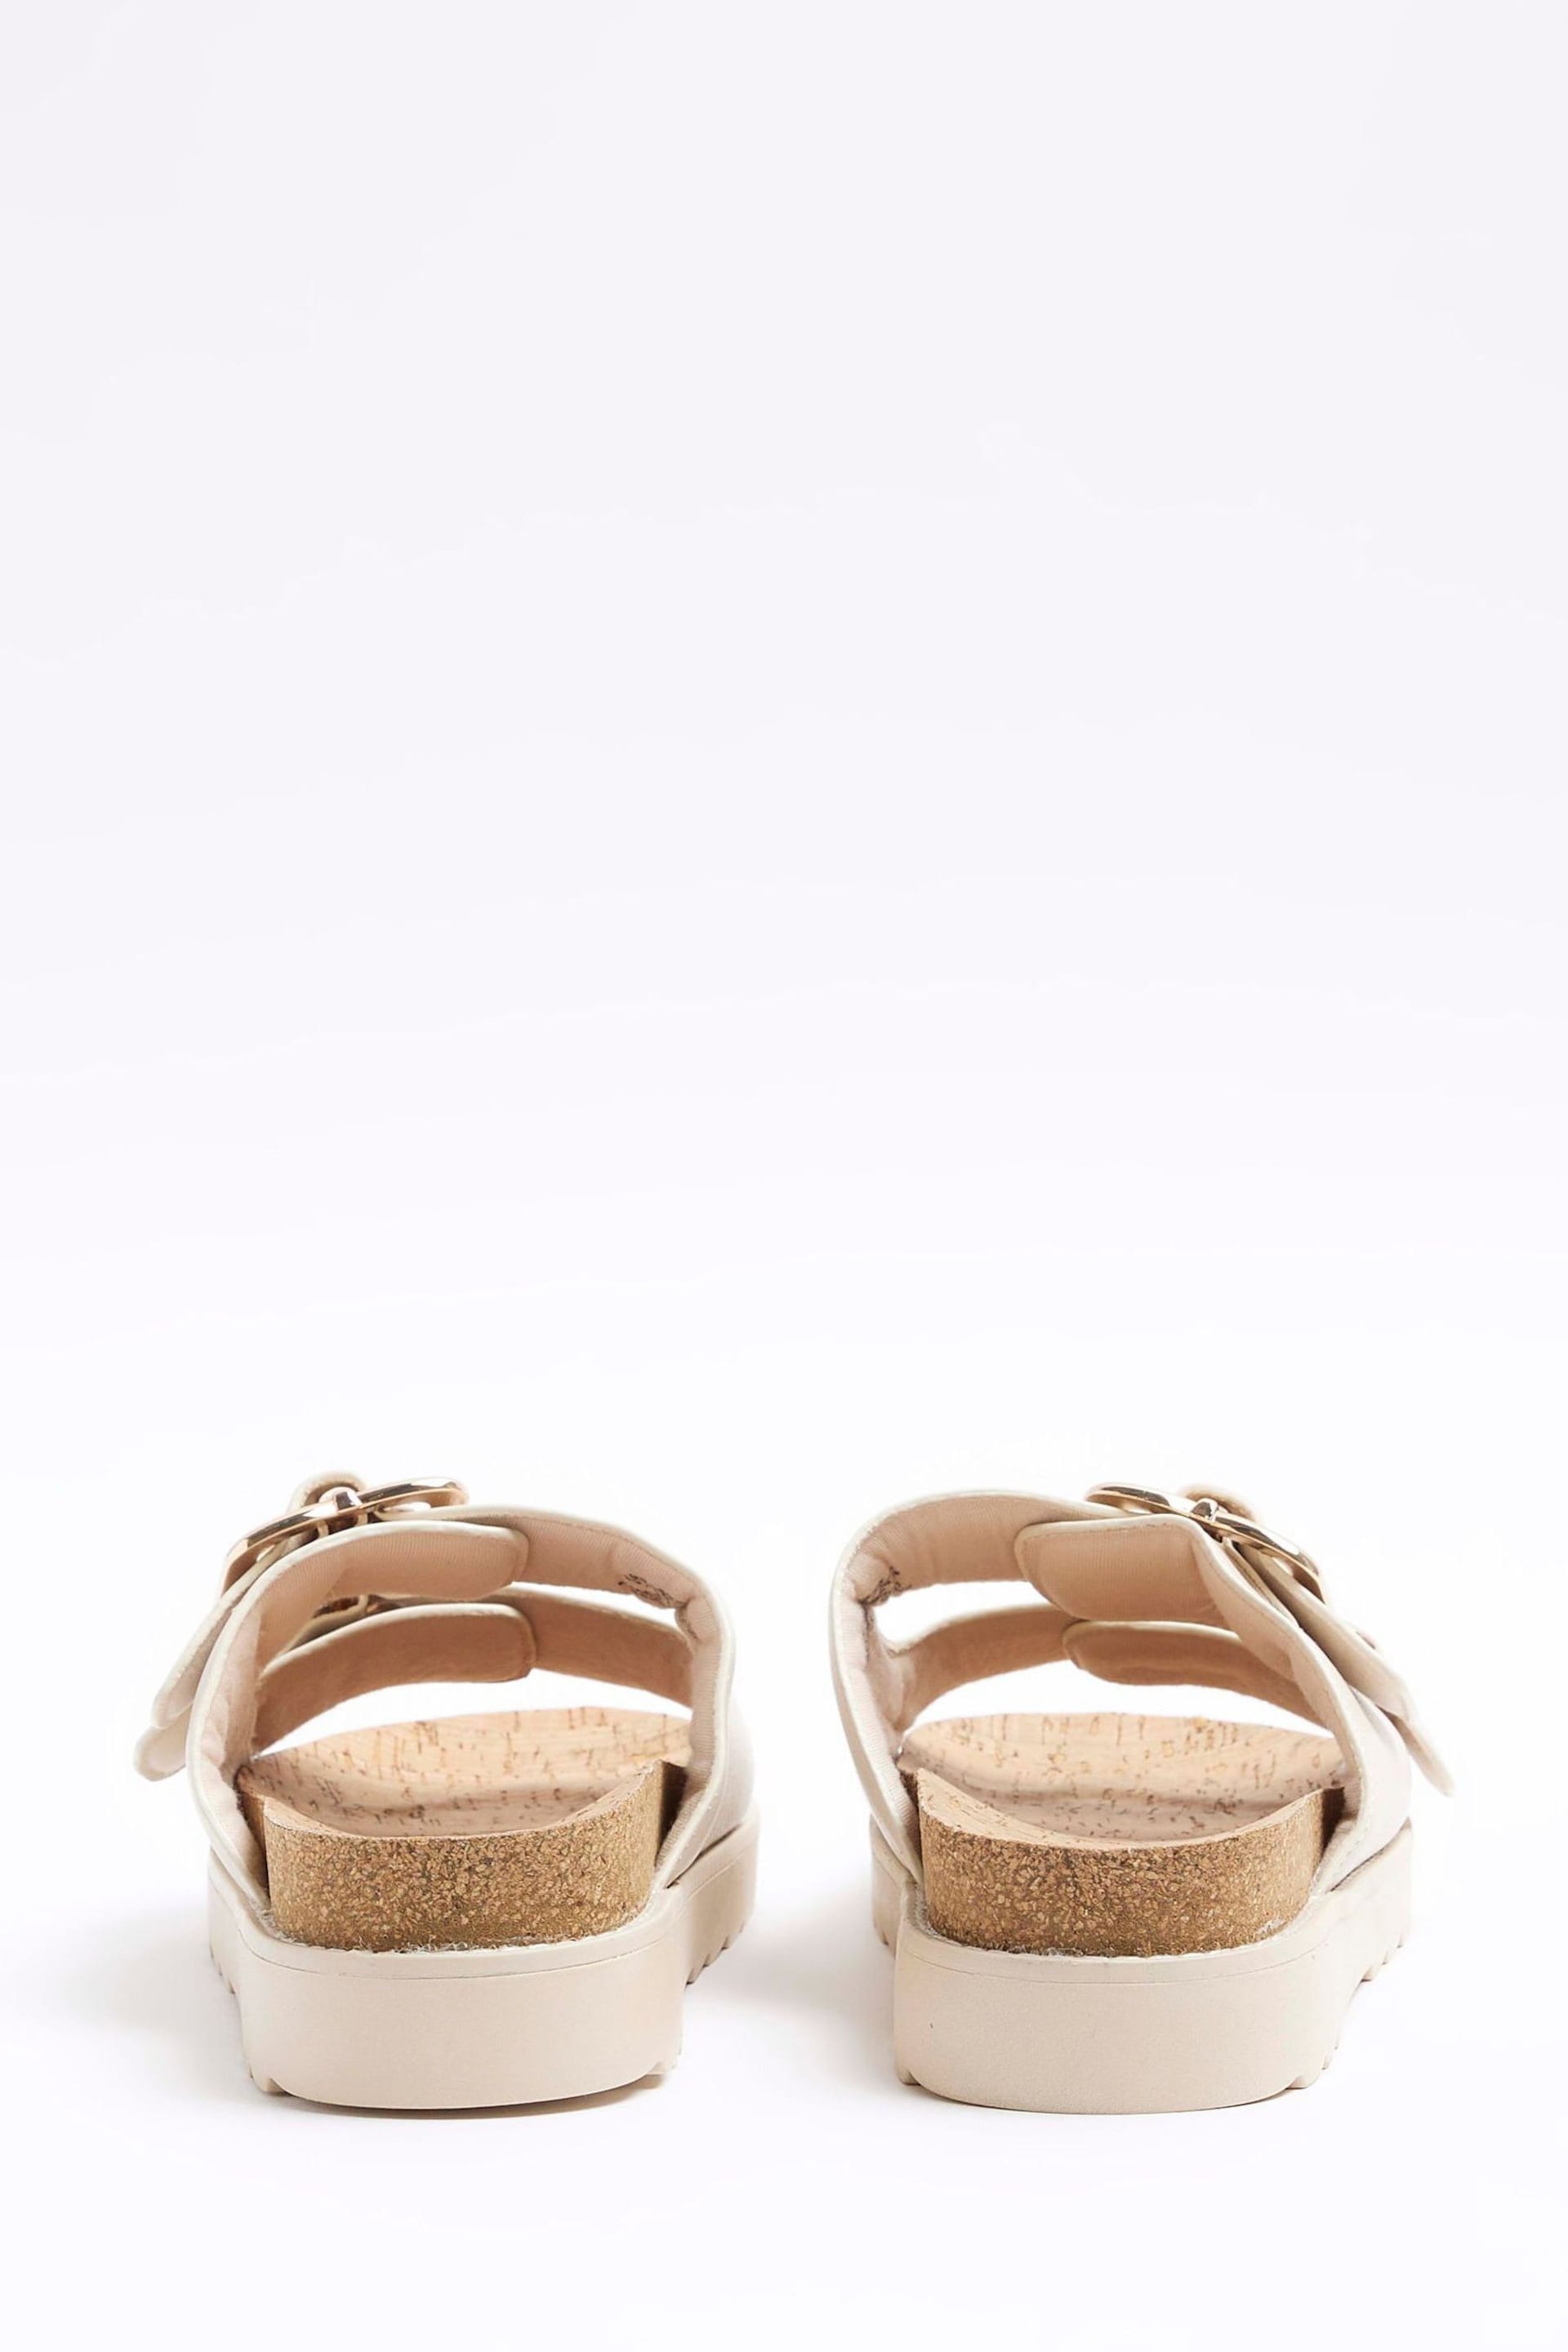 River Island Cream Double Buckle Sandals - Image 3 of 4